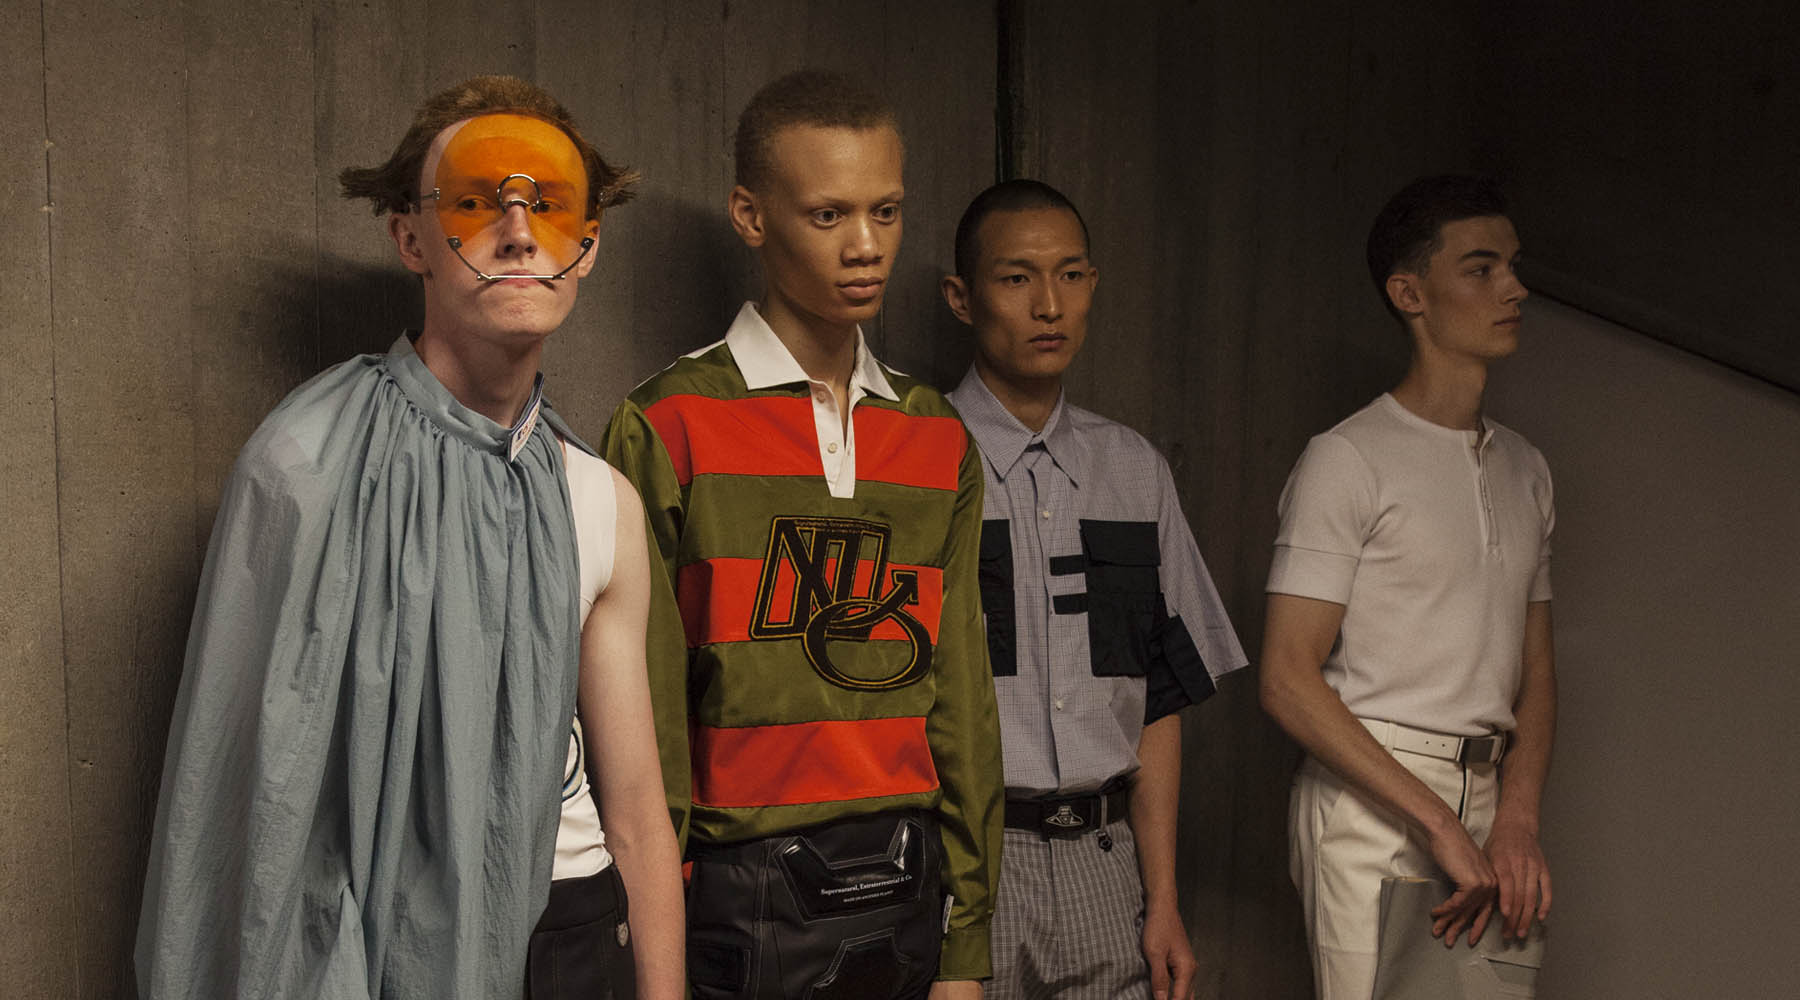 Xander Zhou SS'19 Backstage Images at London Fashion Week Men's by Caoimhe Hahn for Sagaboi. June 10 2018